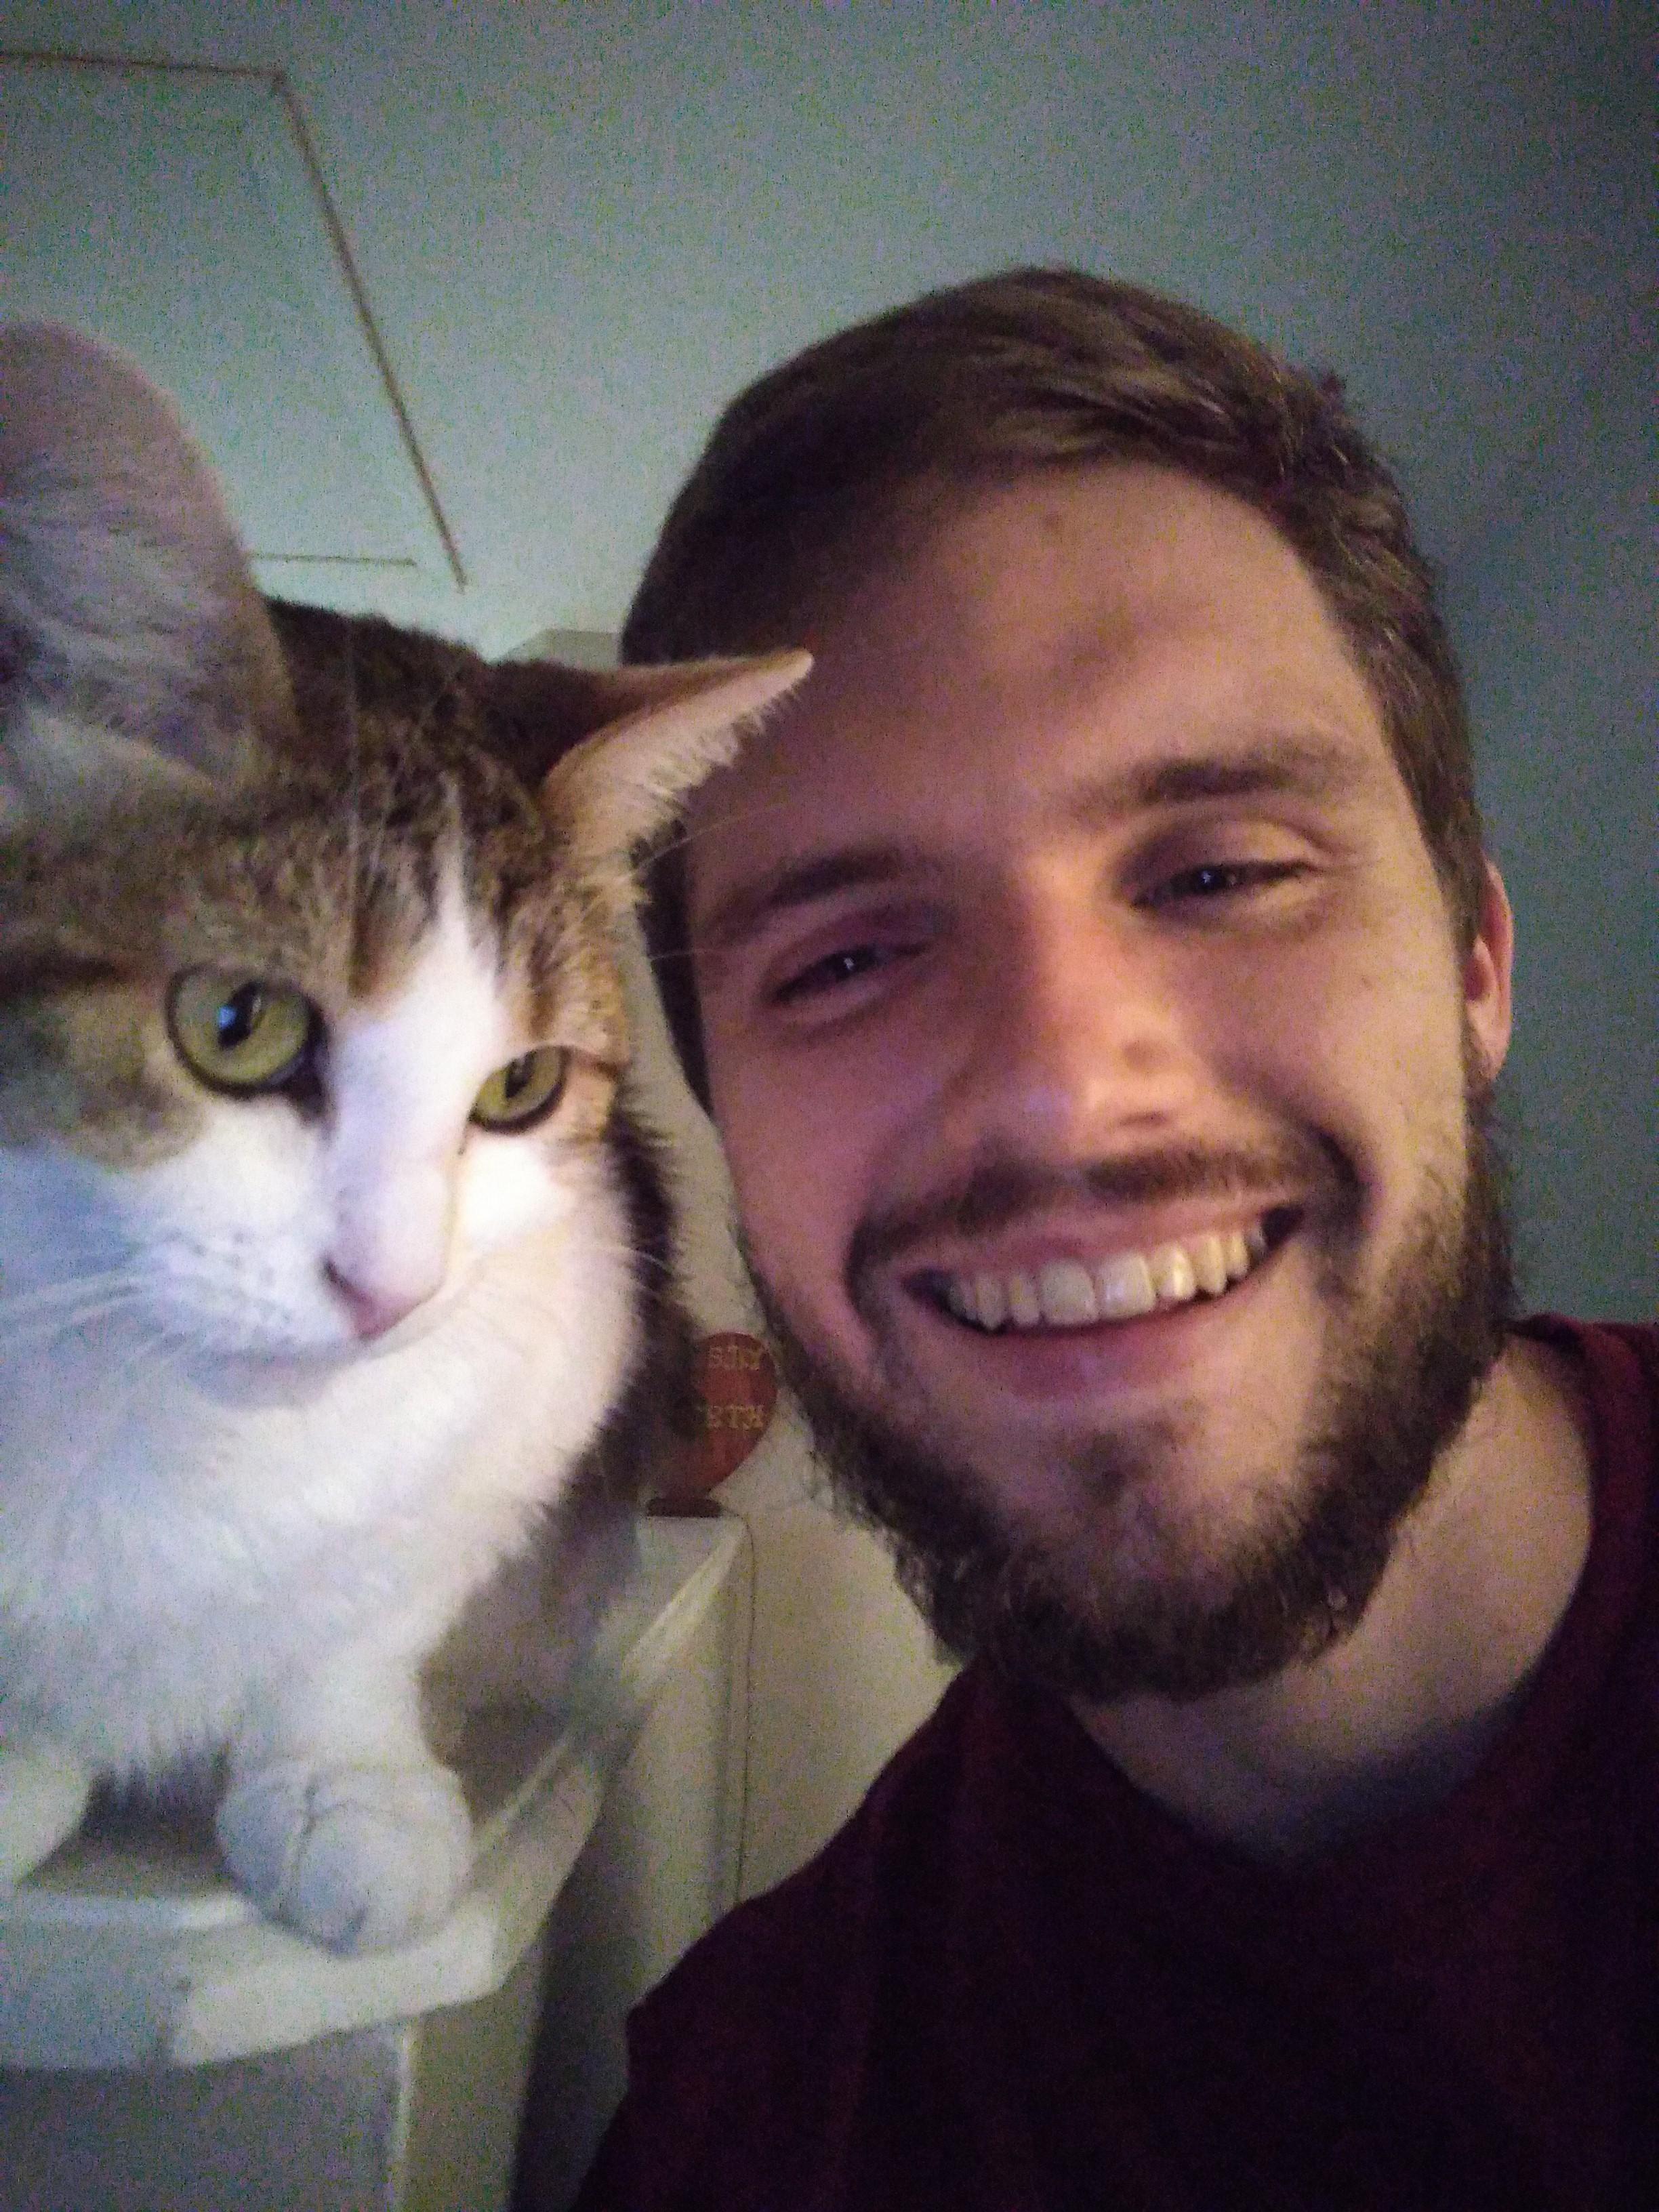 Picture of Kenneth with his cat Phoebe